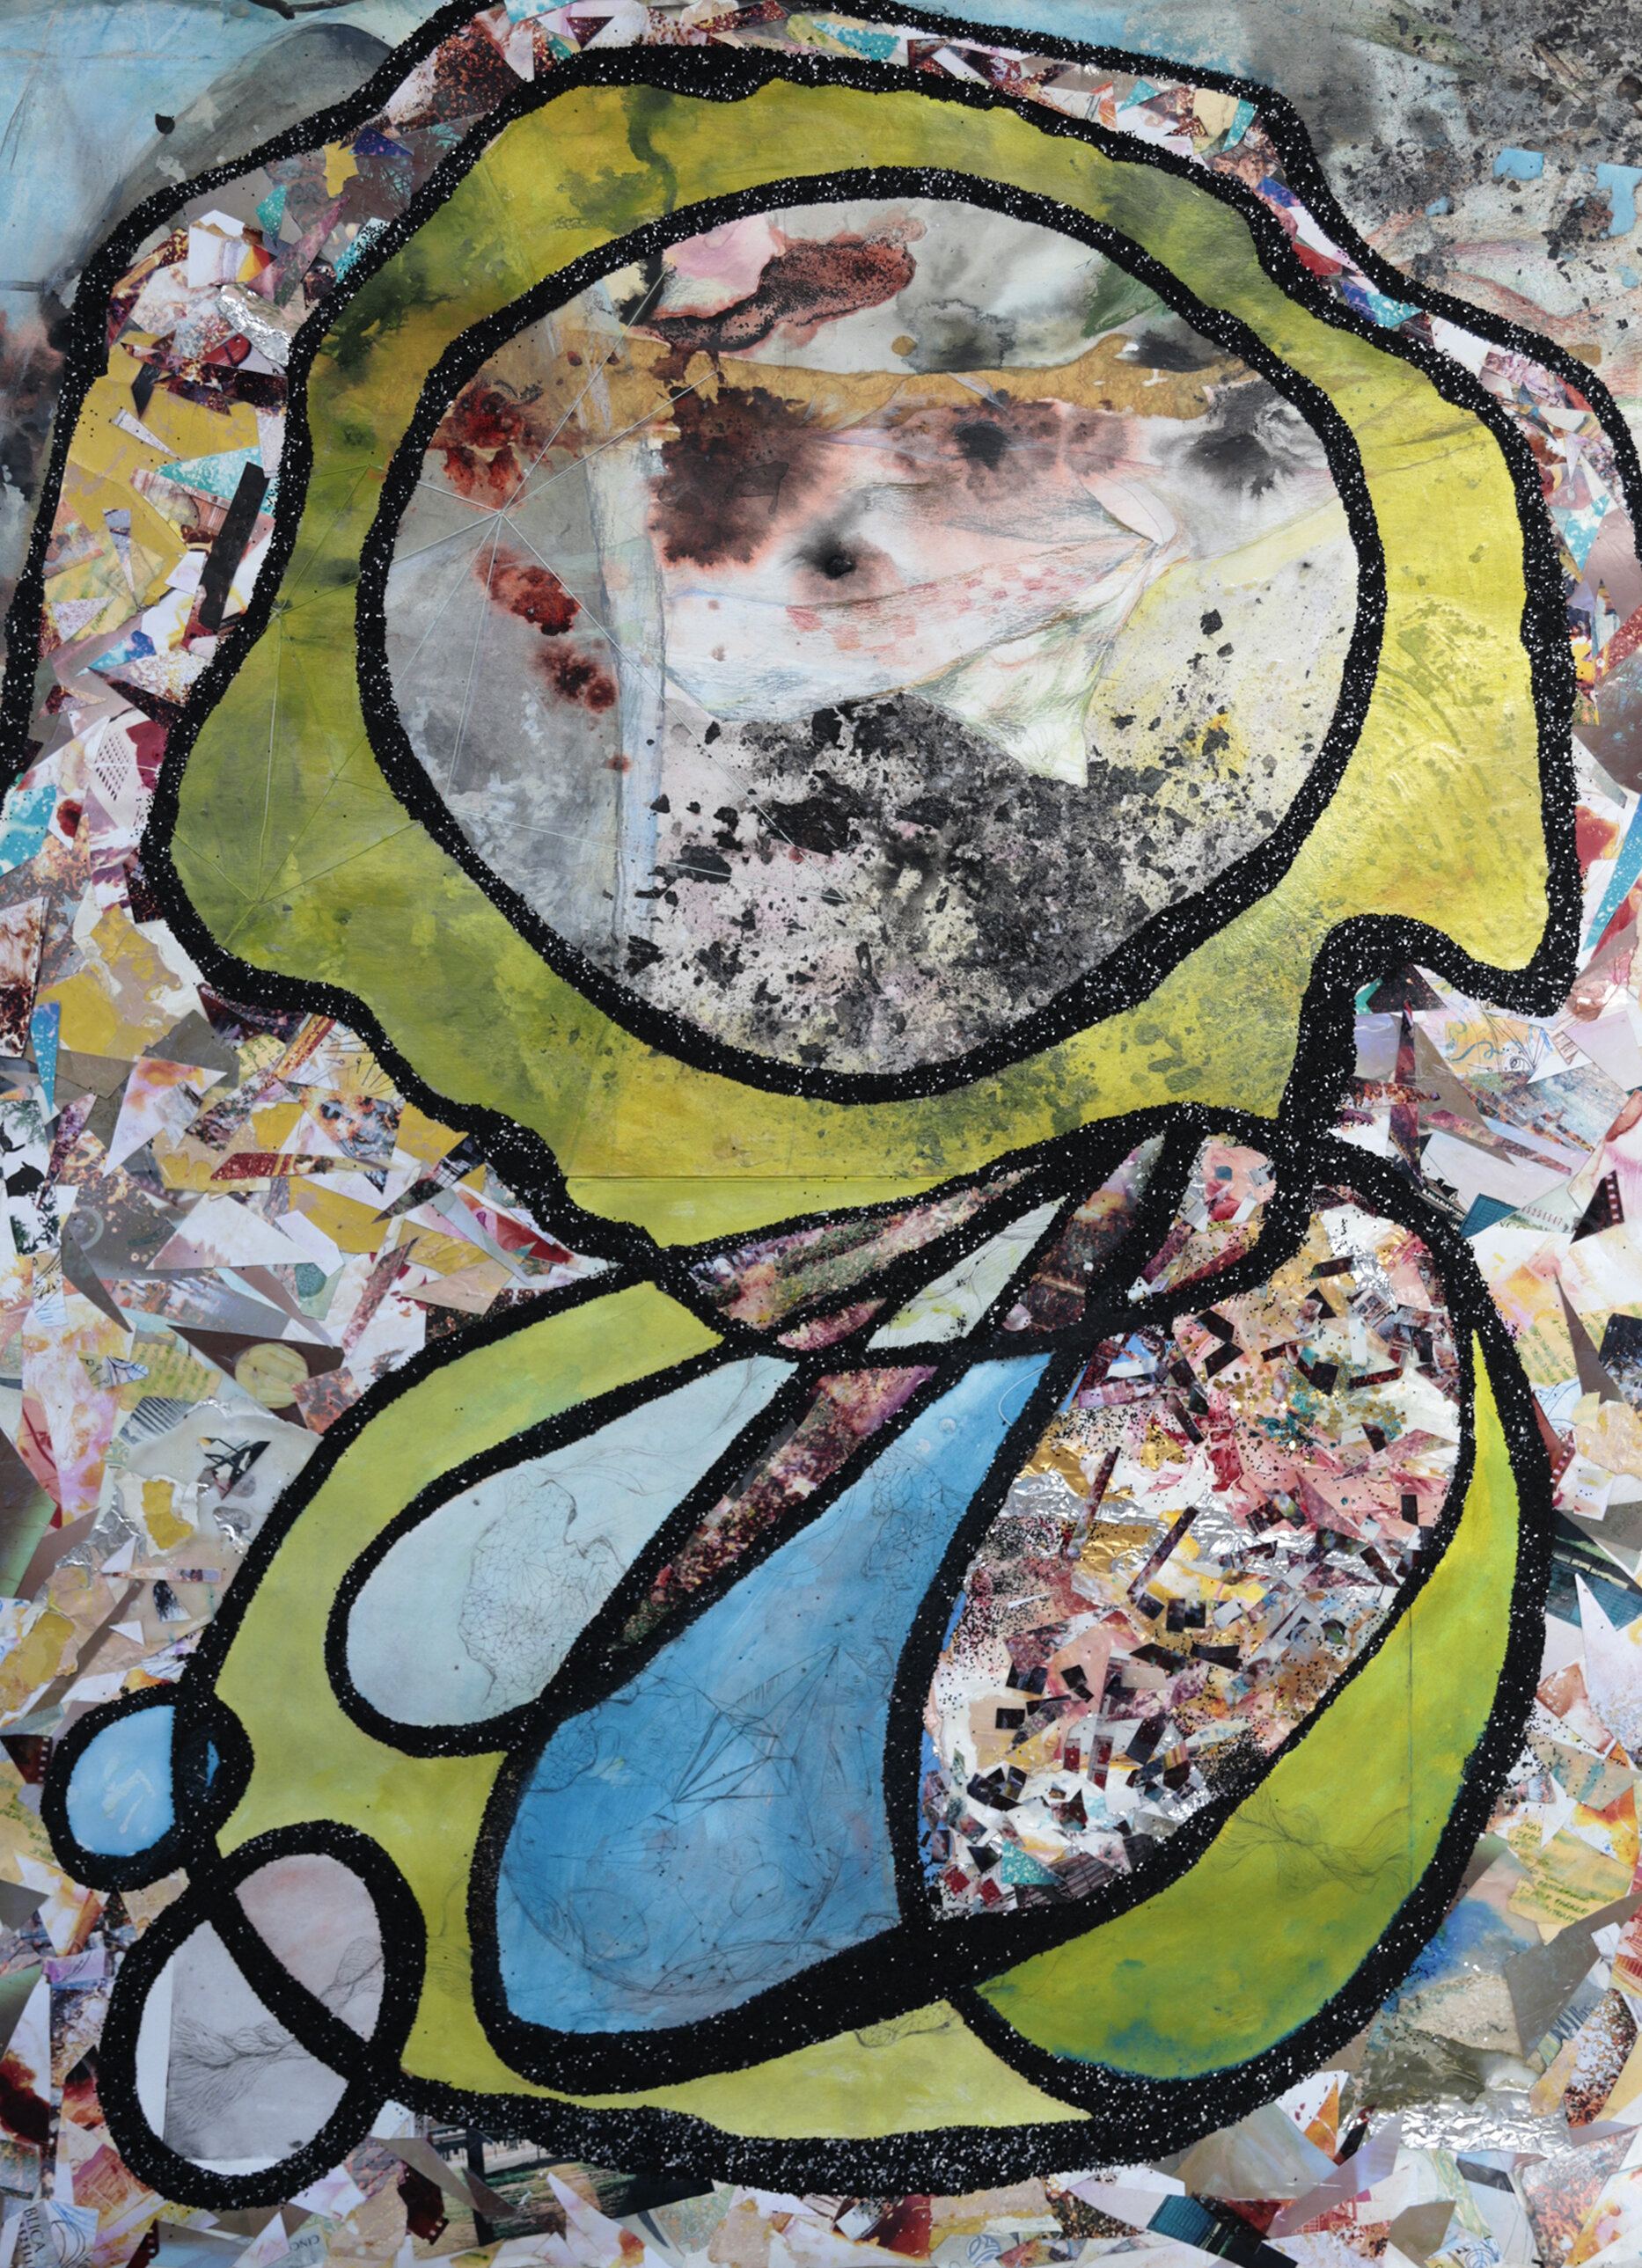   Standpoint in the Early Life   photographs, found material, thread, glitter on paper  42in x 30in  2020   